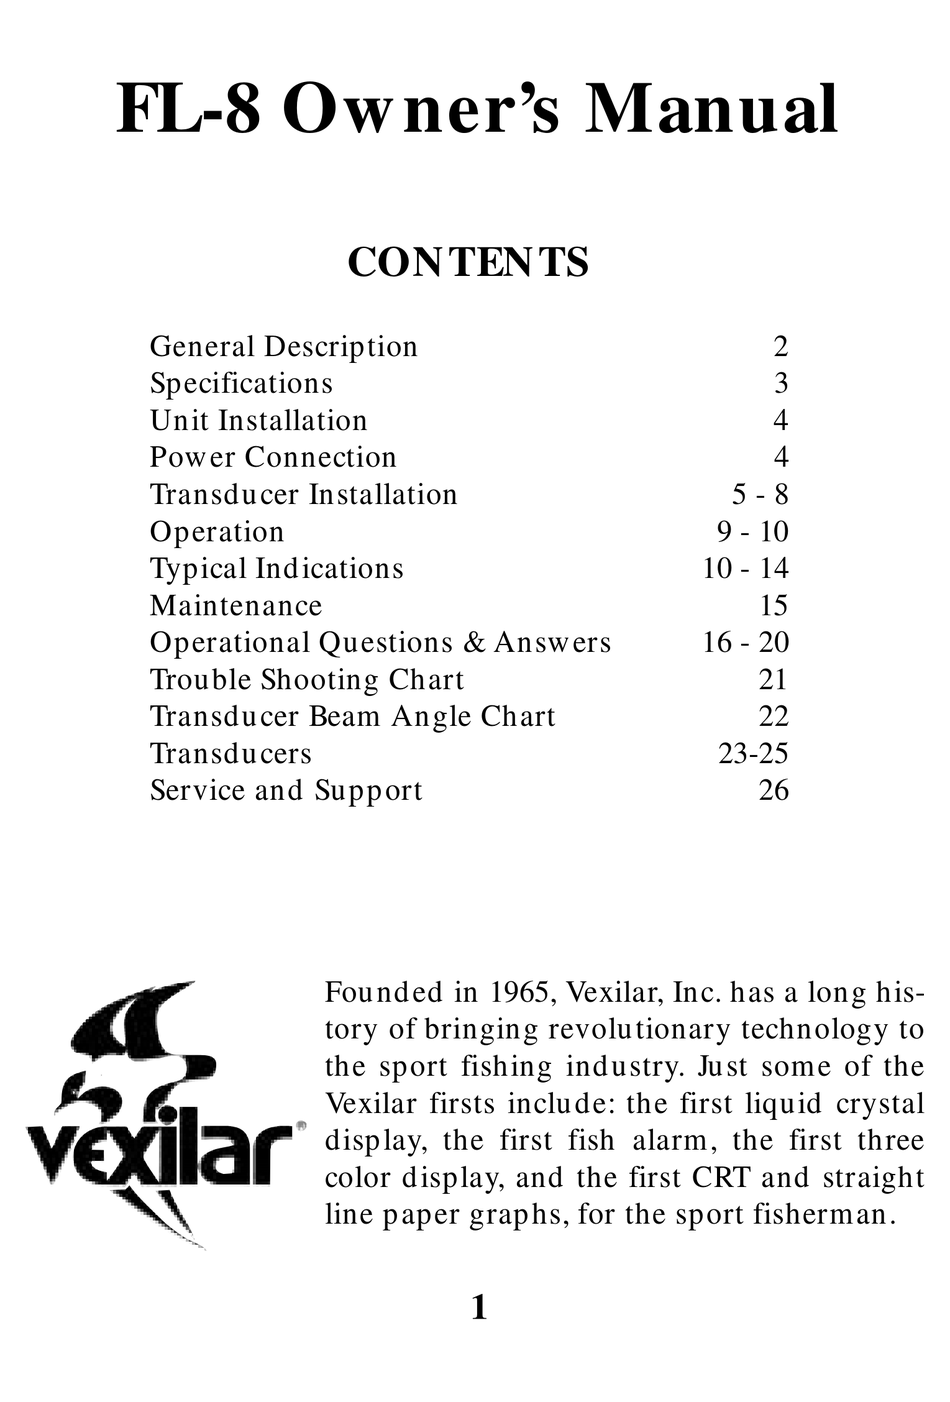 Trouble Shooting Chart - VEXILAR FL-8 Owner's Manual [Page 21]